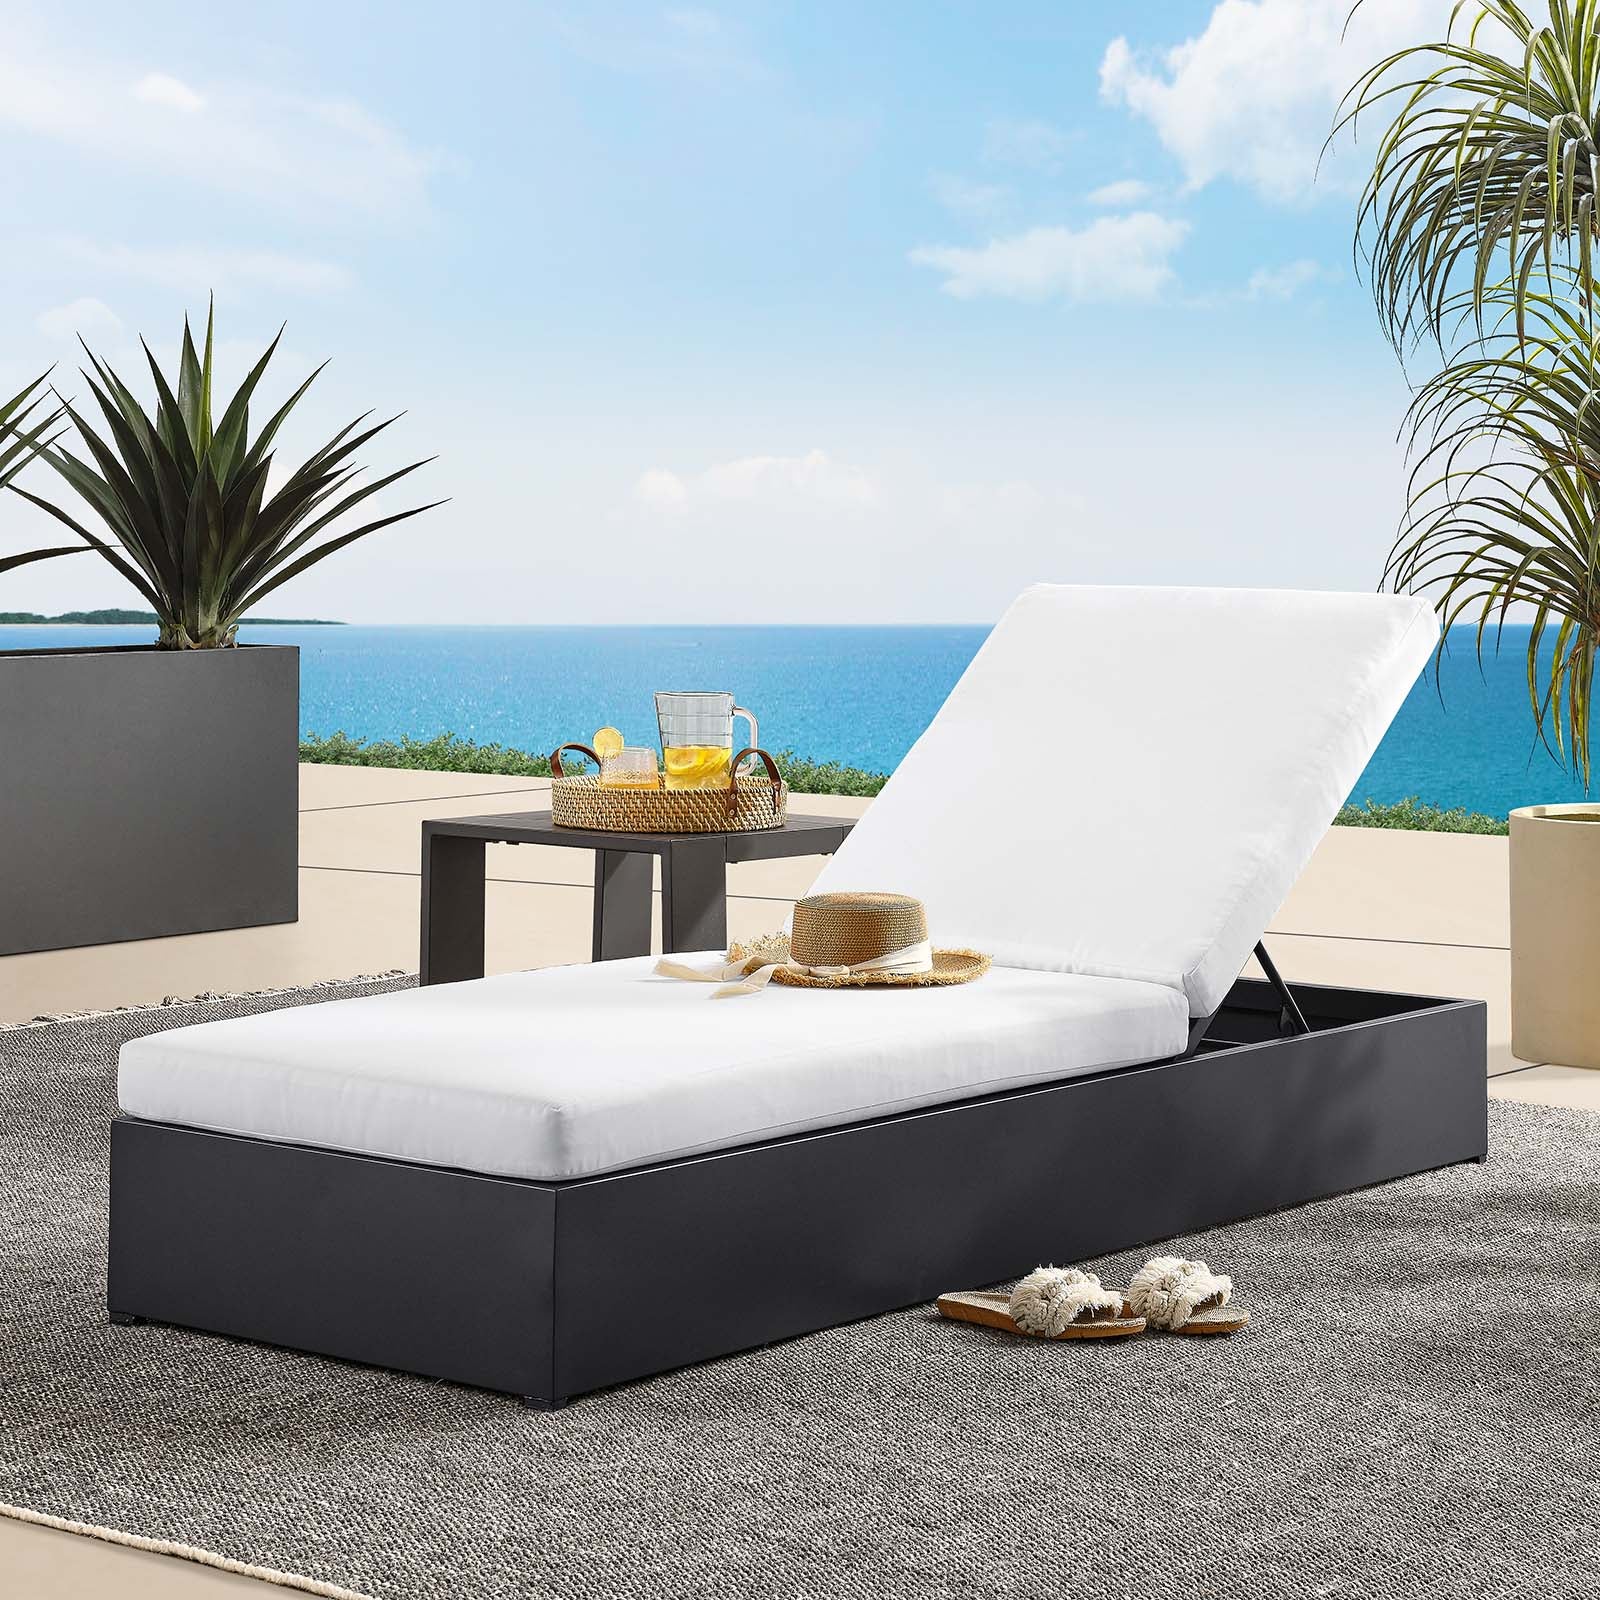 Tahoe Outdoor Patio Powder-Coated Aluminum Chaise Lounge Chair - East Shore Modern Home Furnishings